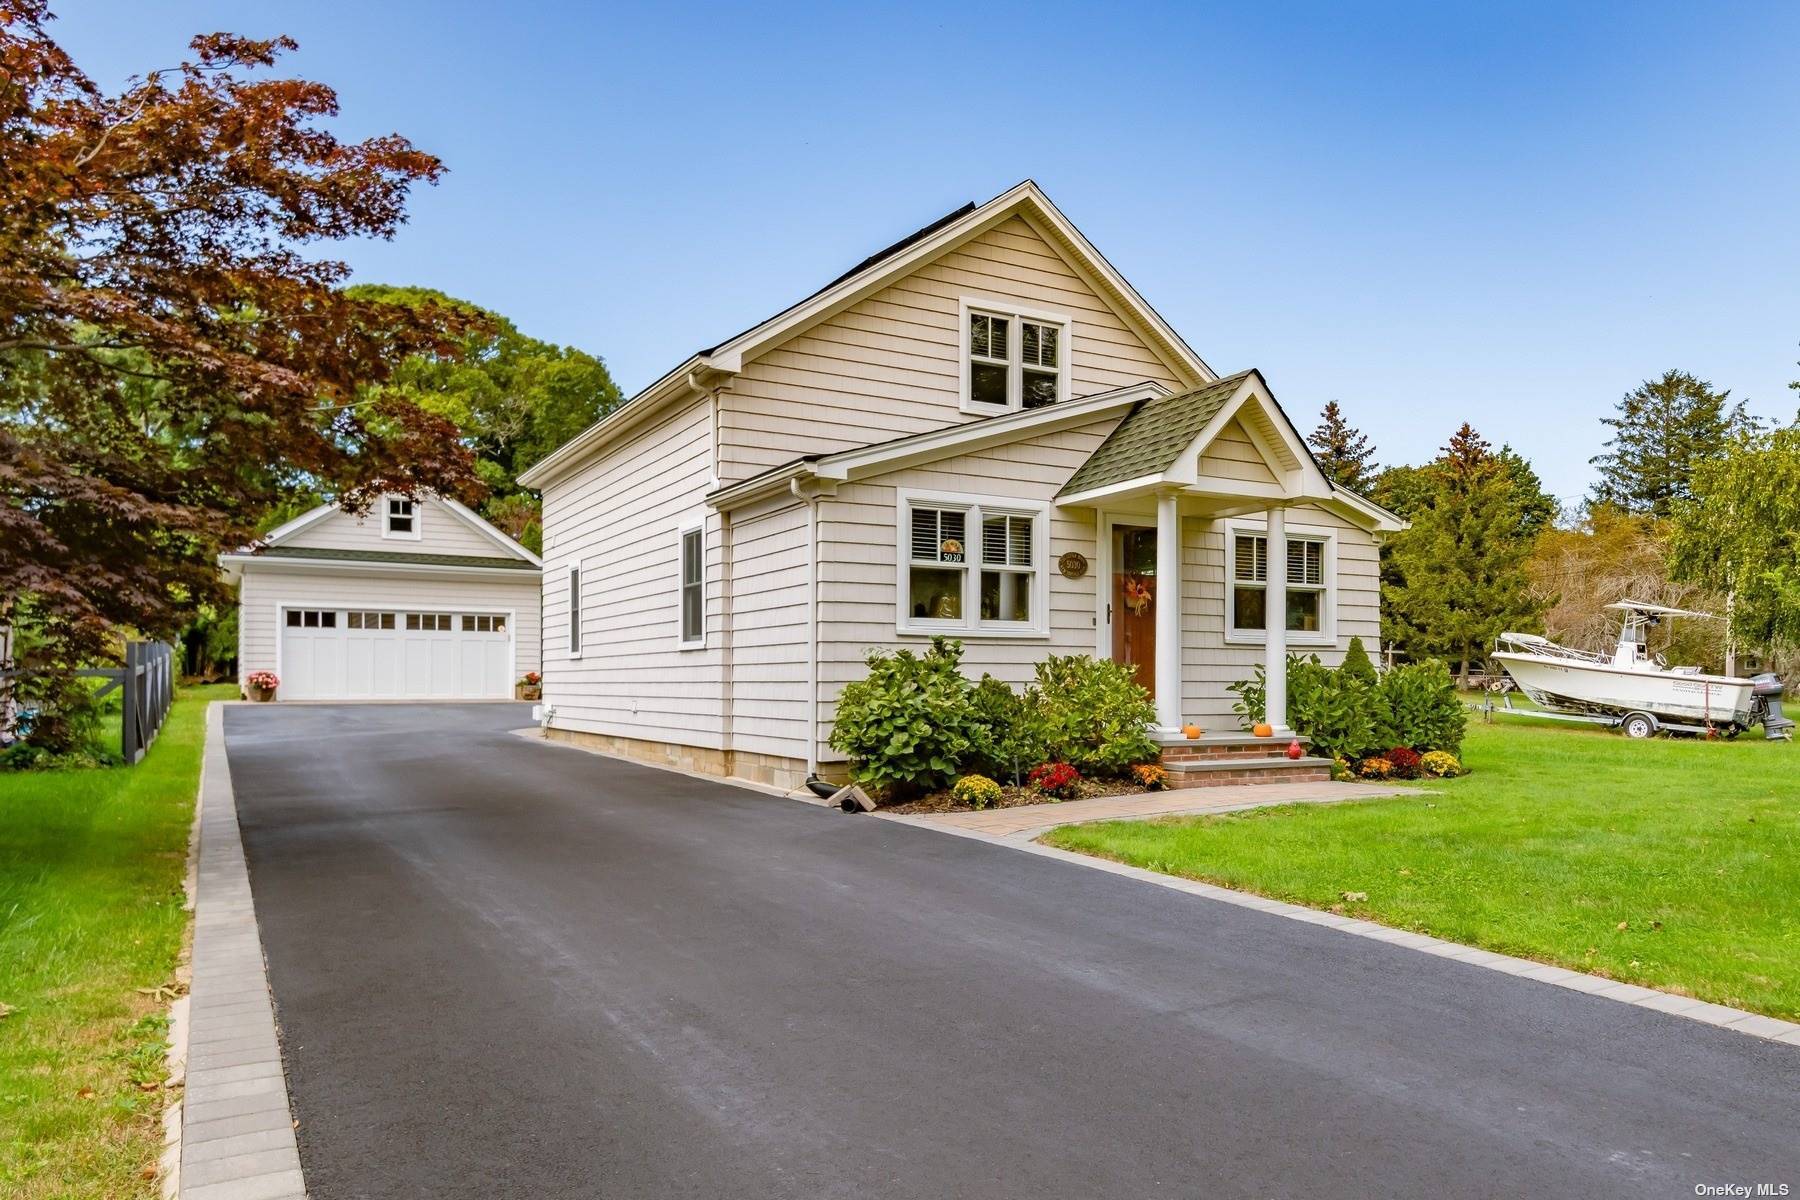 A Simply Perfect and Entirely Turn Key Cottage Style Home in Coveted New Suffolk, NY.